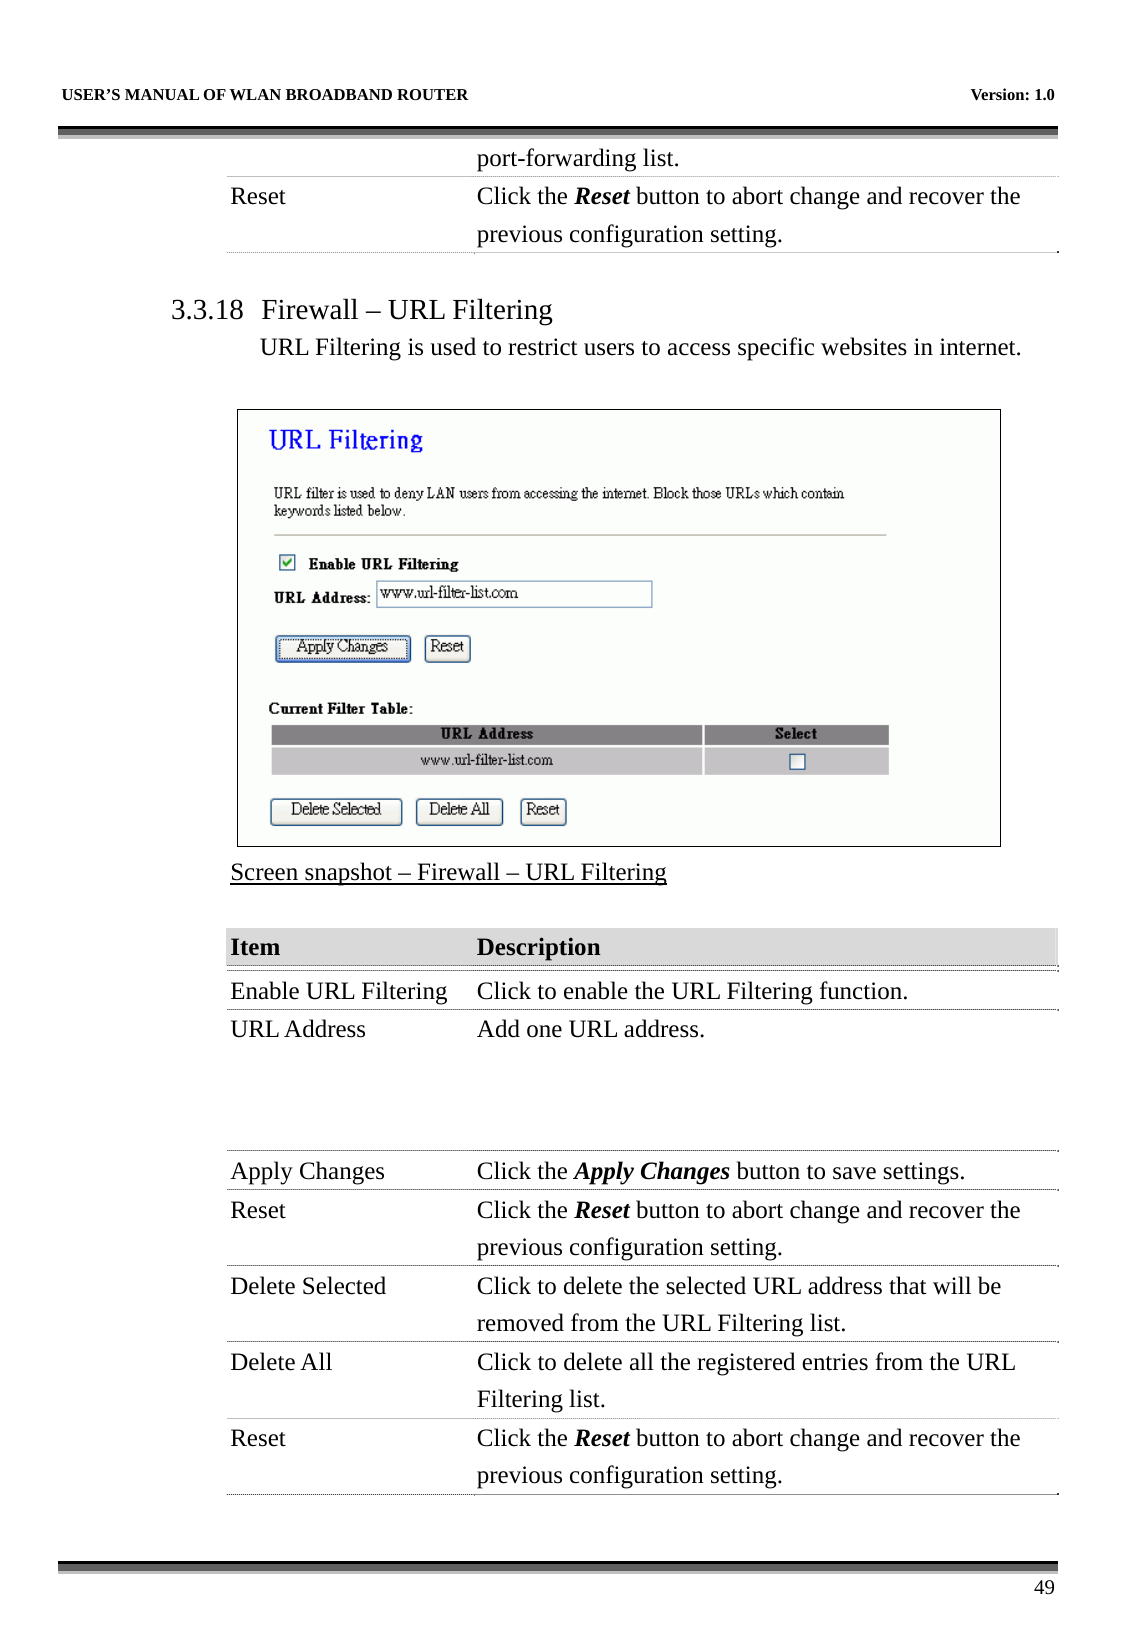   USER’S MANUAL OF WLAN BROADBAND ROUTER    Version: 1.0      49 port-forwarding list.   Reset Click the Reset button to abort change and recover the previous configuration setting.  3.3.18 Firewall – URL Filtering URL Filtering is used to restrict users to access specific websites in internet.   Screen snapshot – Firewall – URL Filtering  Item  Description   Enable URL Filtering  Click to enable the URL Filtering function. URL Address  Add one URL address. Apply Changes  Click the Apply Changes button to save settings. Reset Click the Reset button to abort change and recover the previous configuration setting. Delete Selected  Click to delete the selected URL address that will be removed from the URL Filtering list. Delete All  Click to delete all the registered entries from the URL Filtering list.   Reset Click the Reset button to abort change and recover the previous configuration setting.  